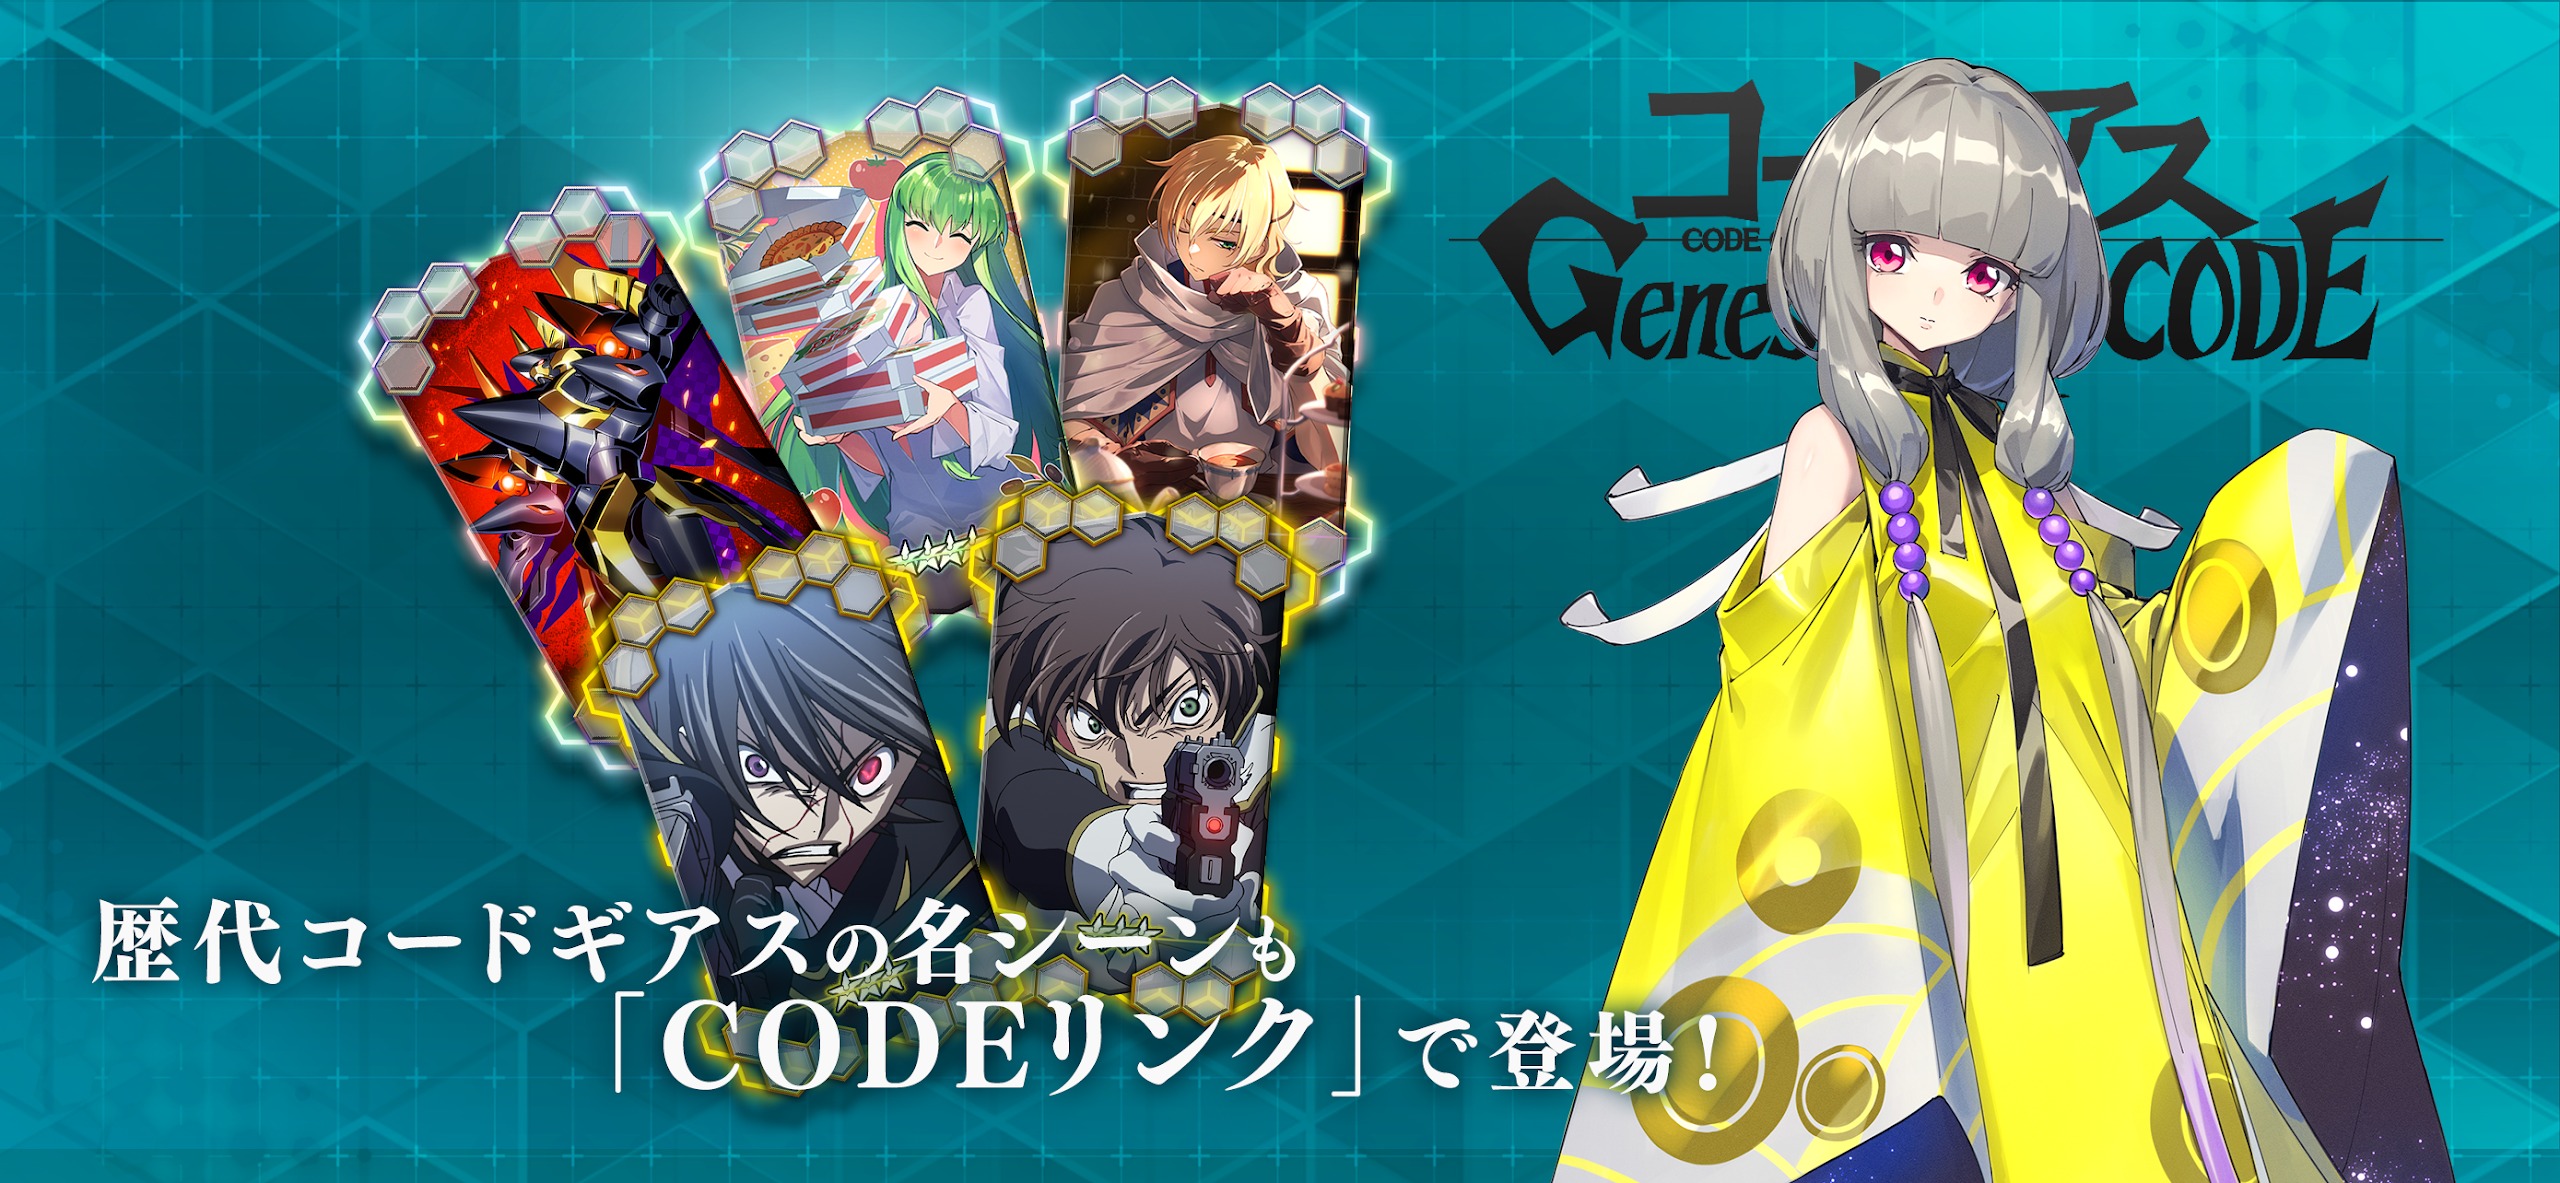 Code Geass Genesic Re;CODE Mobile Game Sets End of Service Date